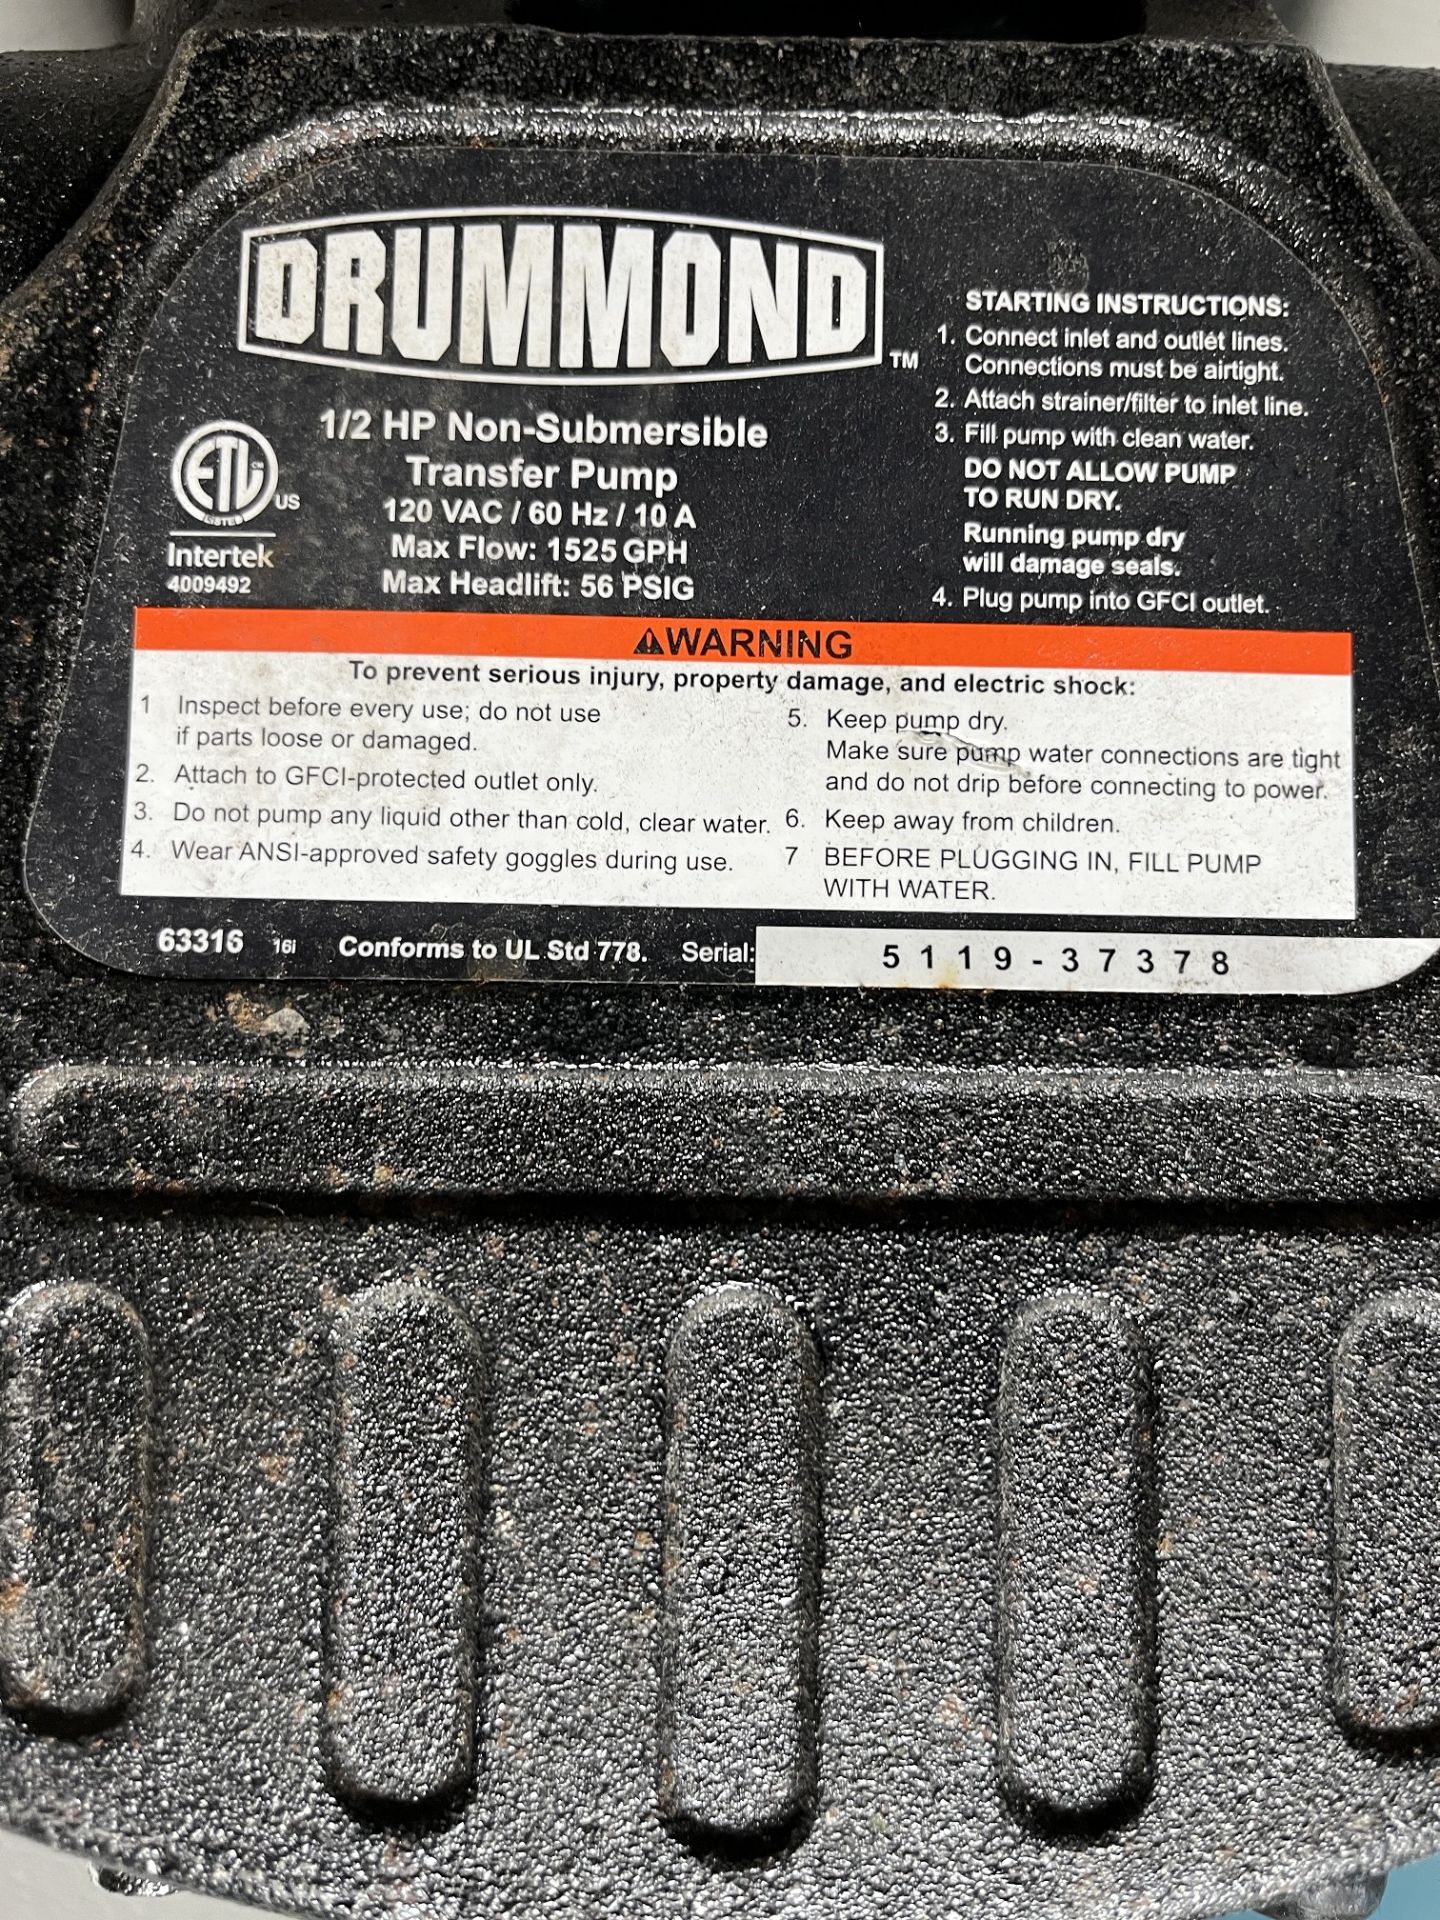 DRUMMOND 1/2 HP NON SUBMERSIBLE TRANSFER PUMP - Image 2 of 3